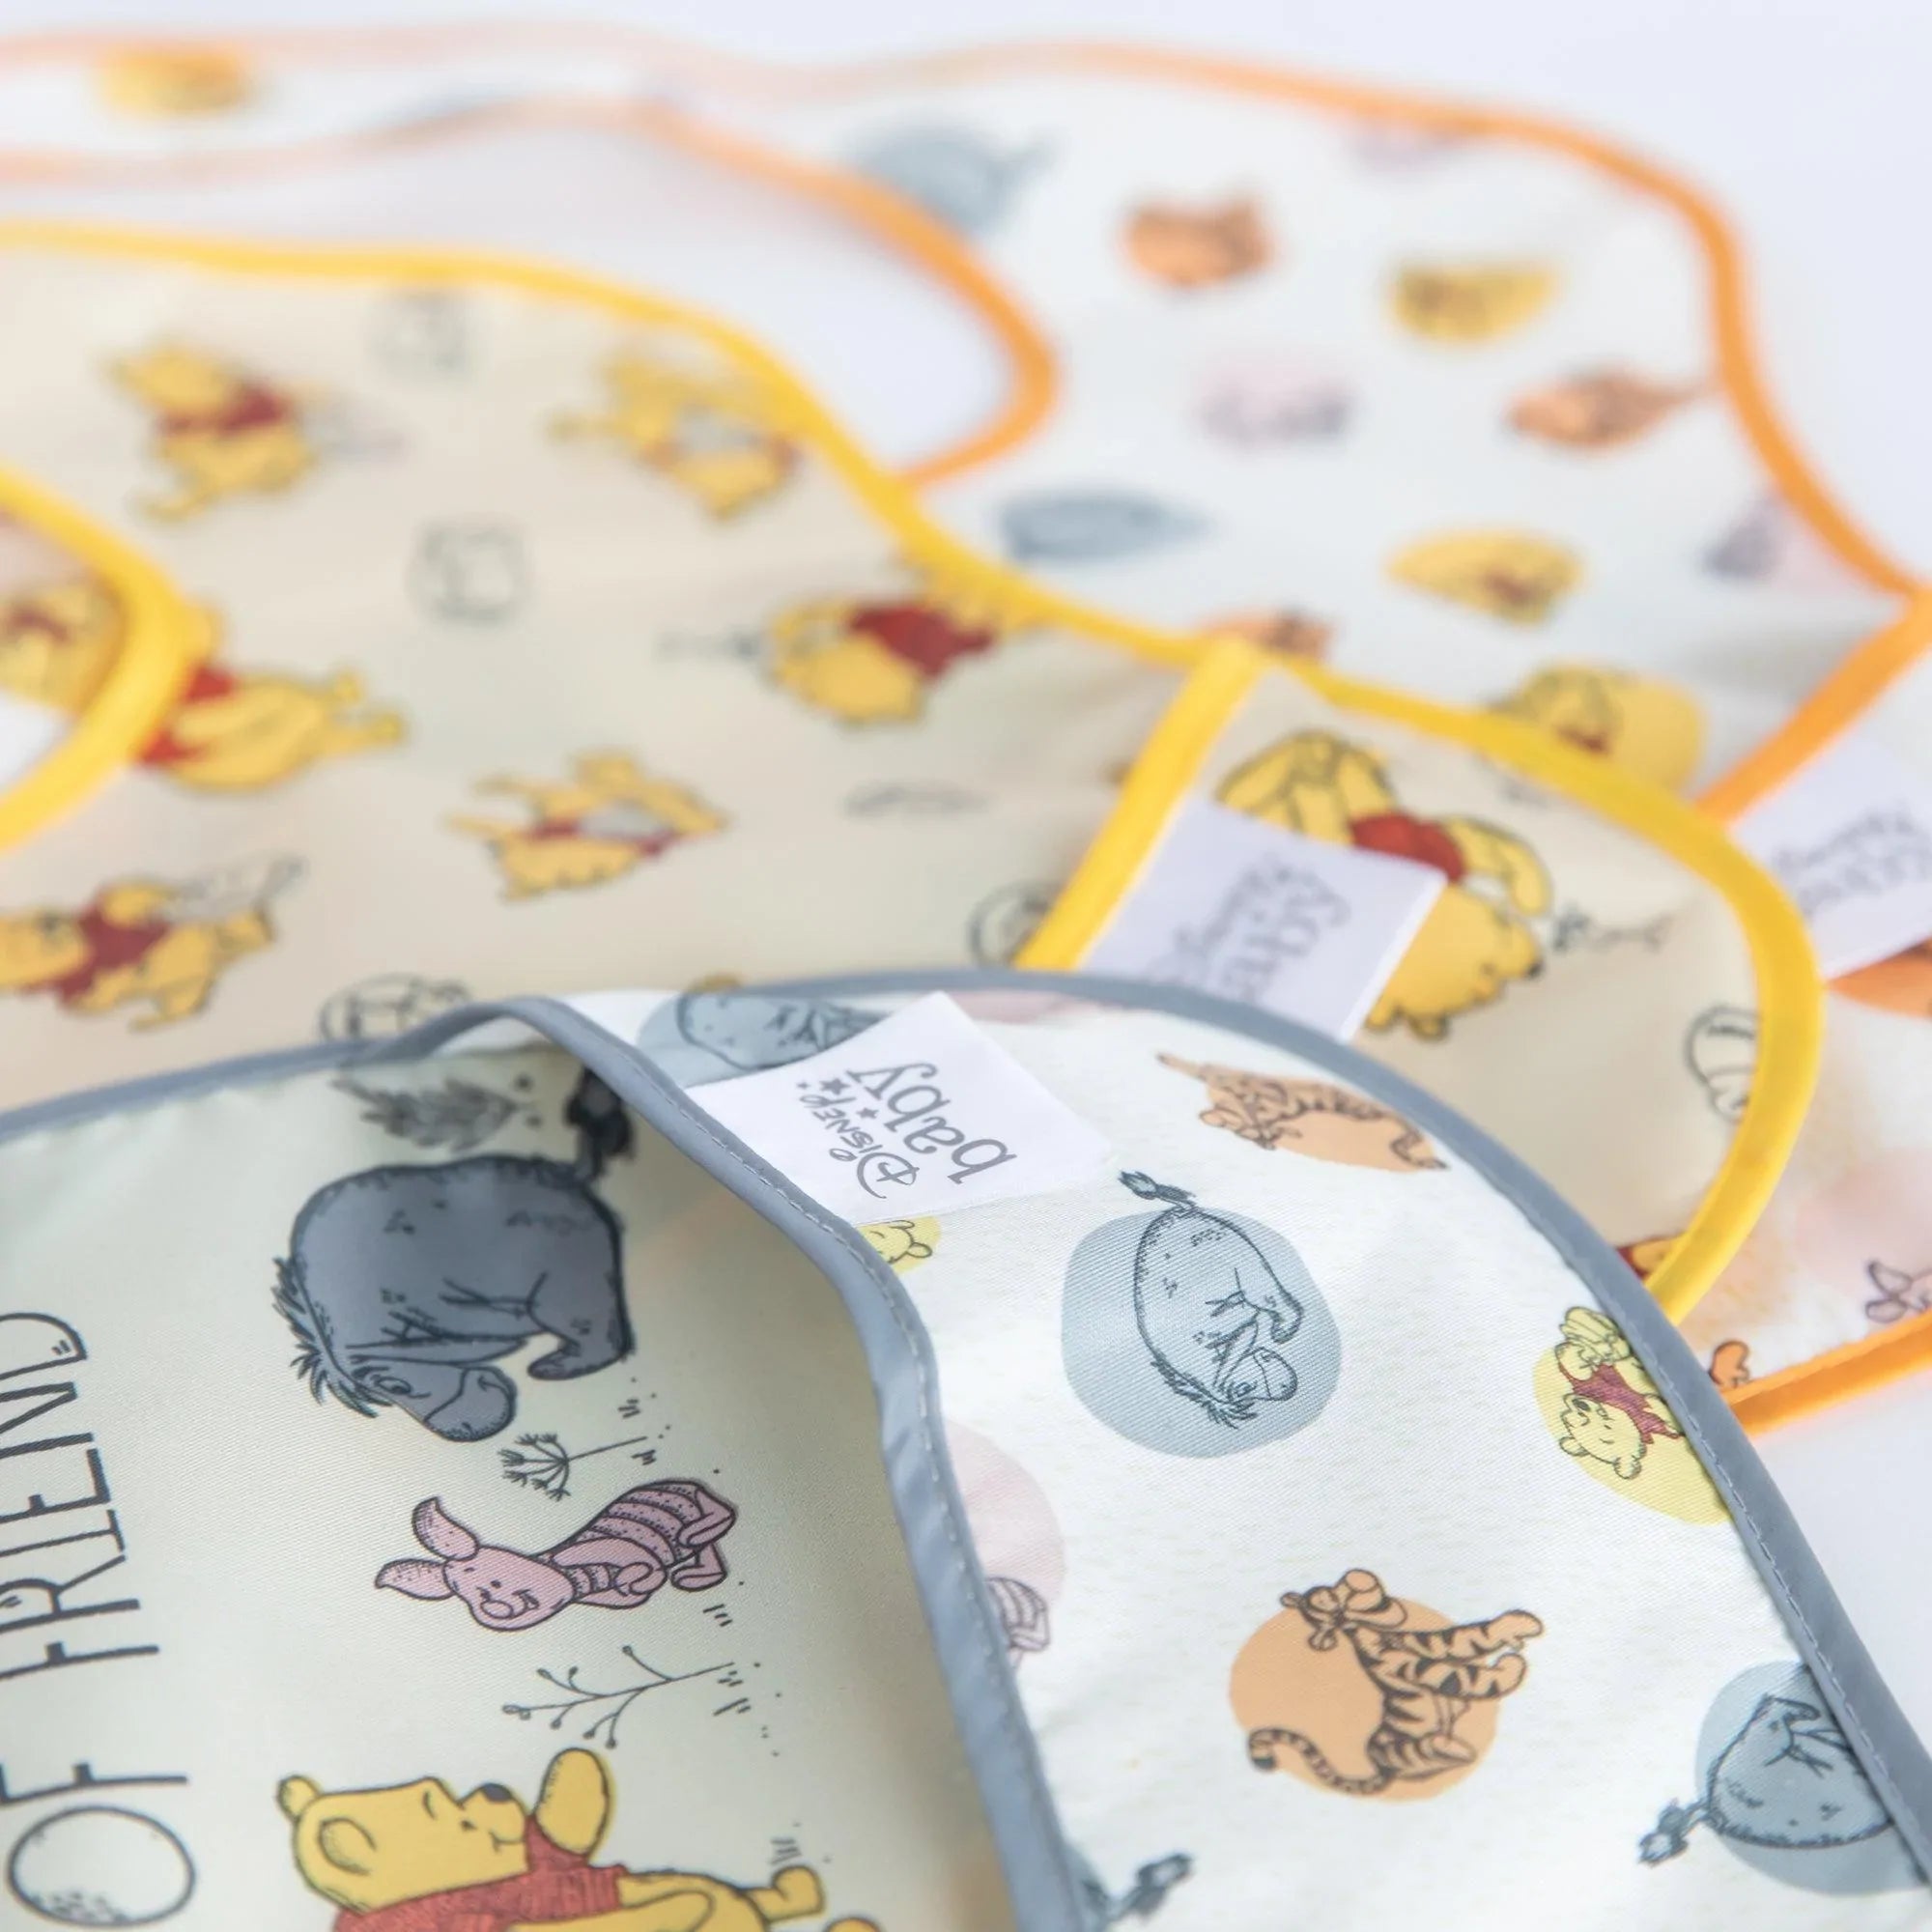 SuperBib® 3 Pack: Pooh Bear and Friends - Bumkins